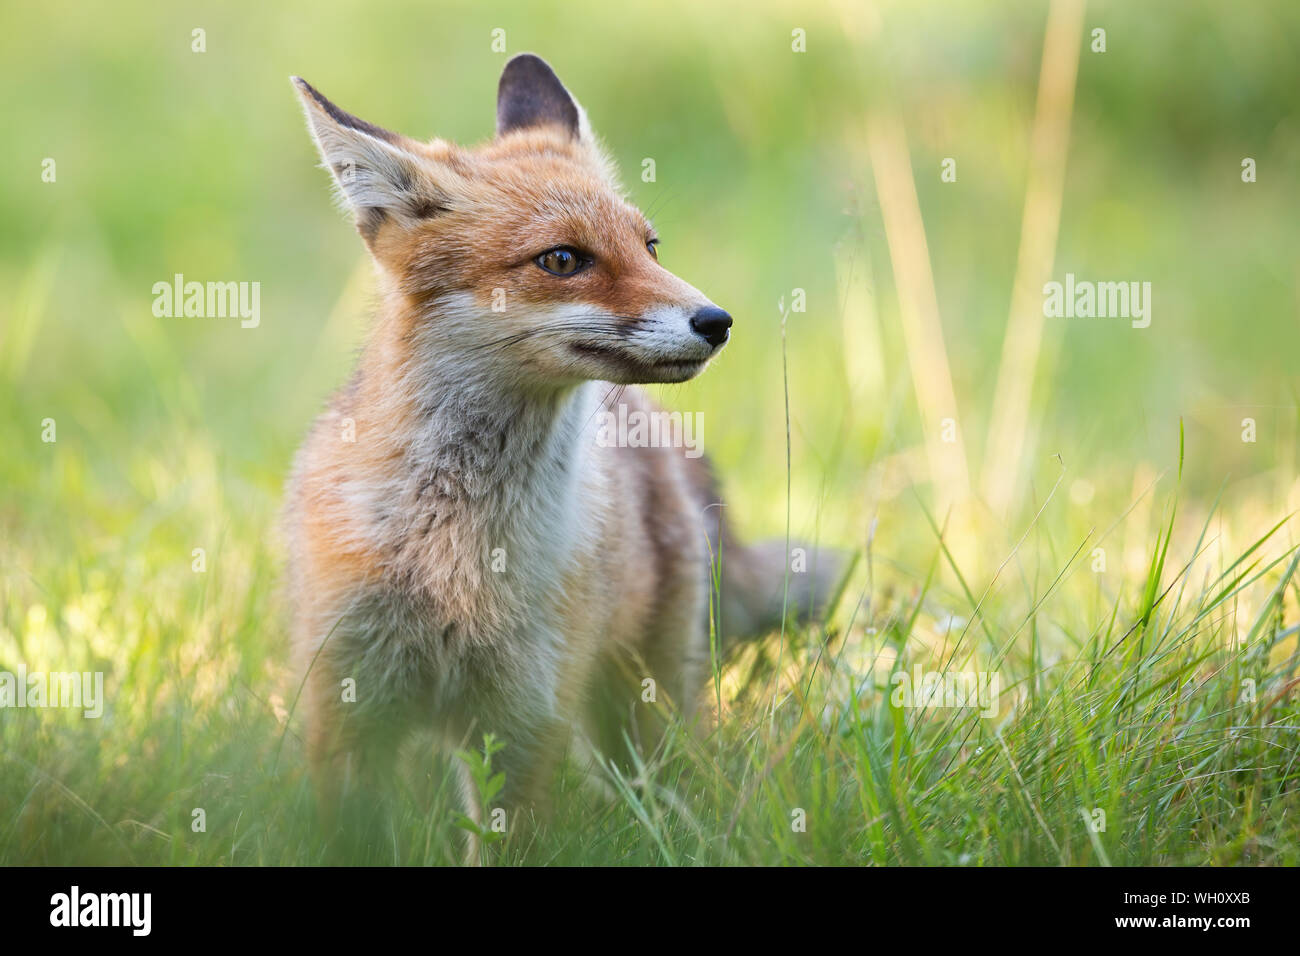 Cute red fox standing on green grass in summer with blurred background. Stock Photo